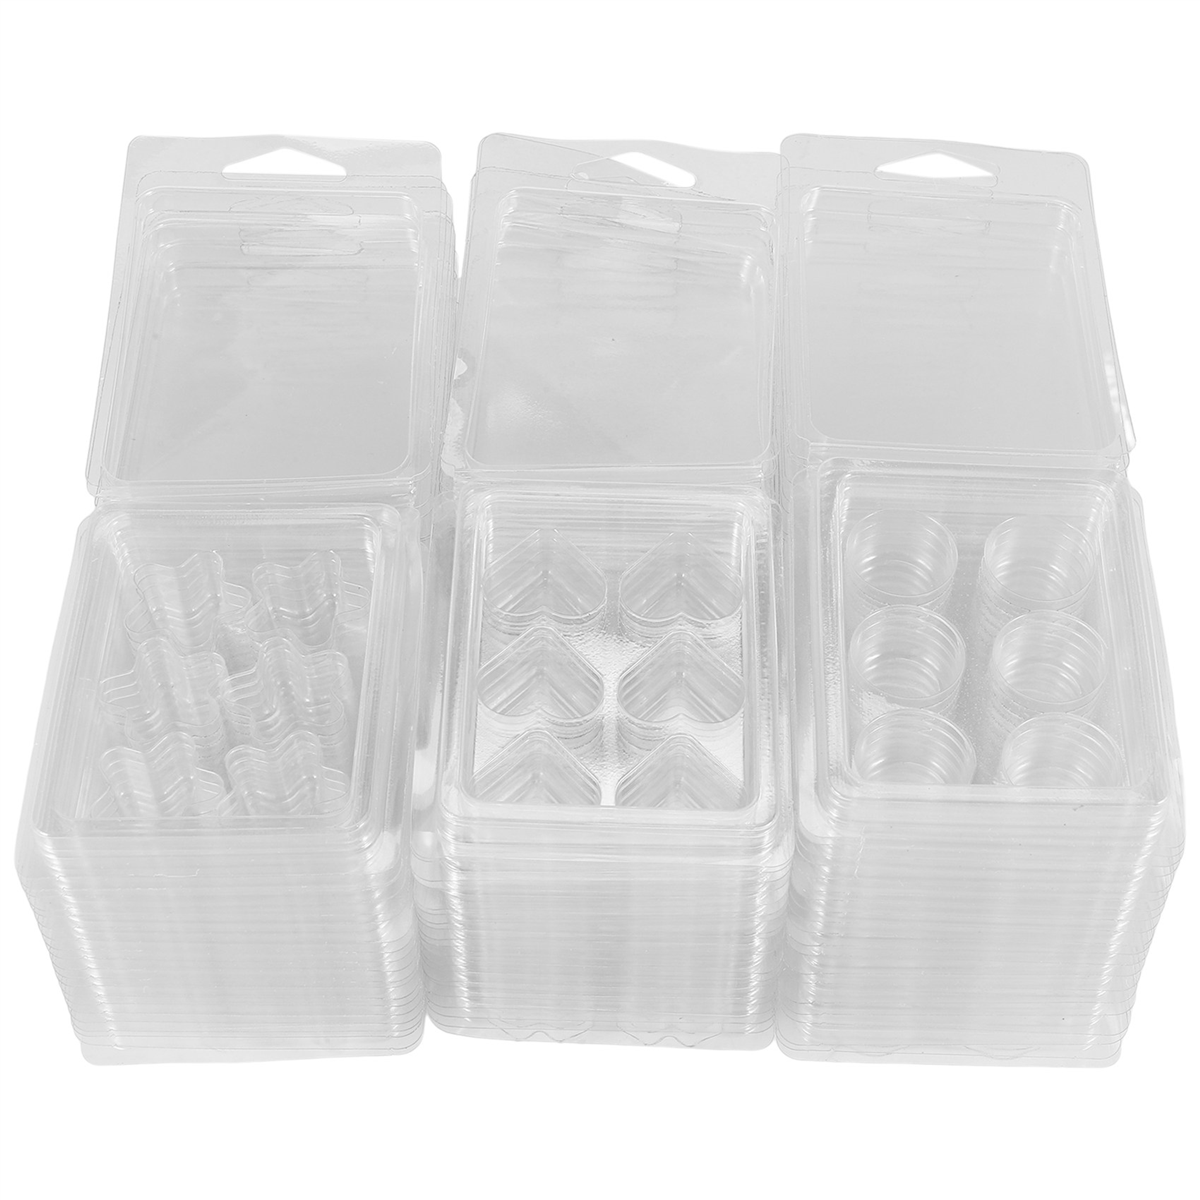 Winyuyby 60 Pack Wax Melt Containers-6 Cavity Clear Empty Plastic